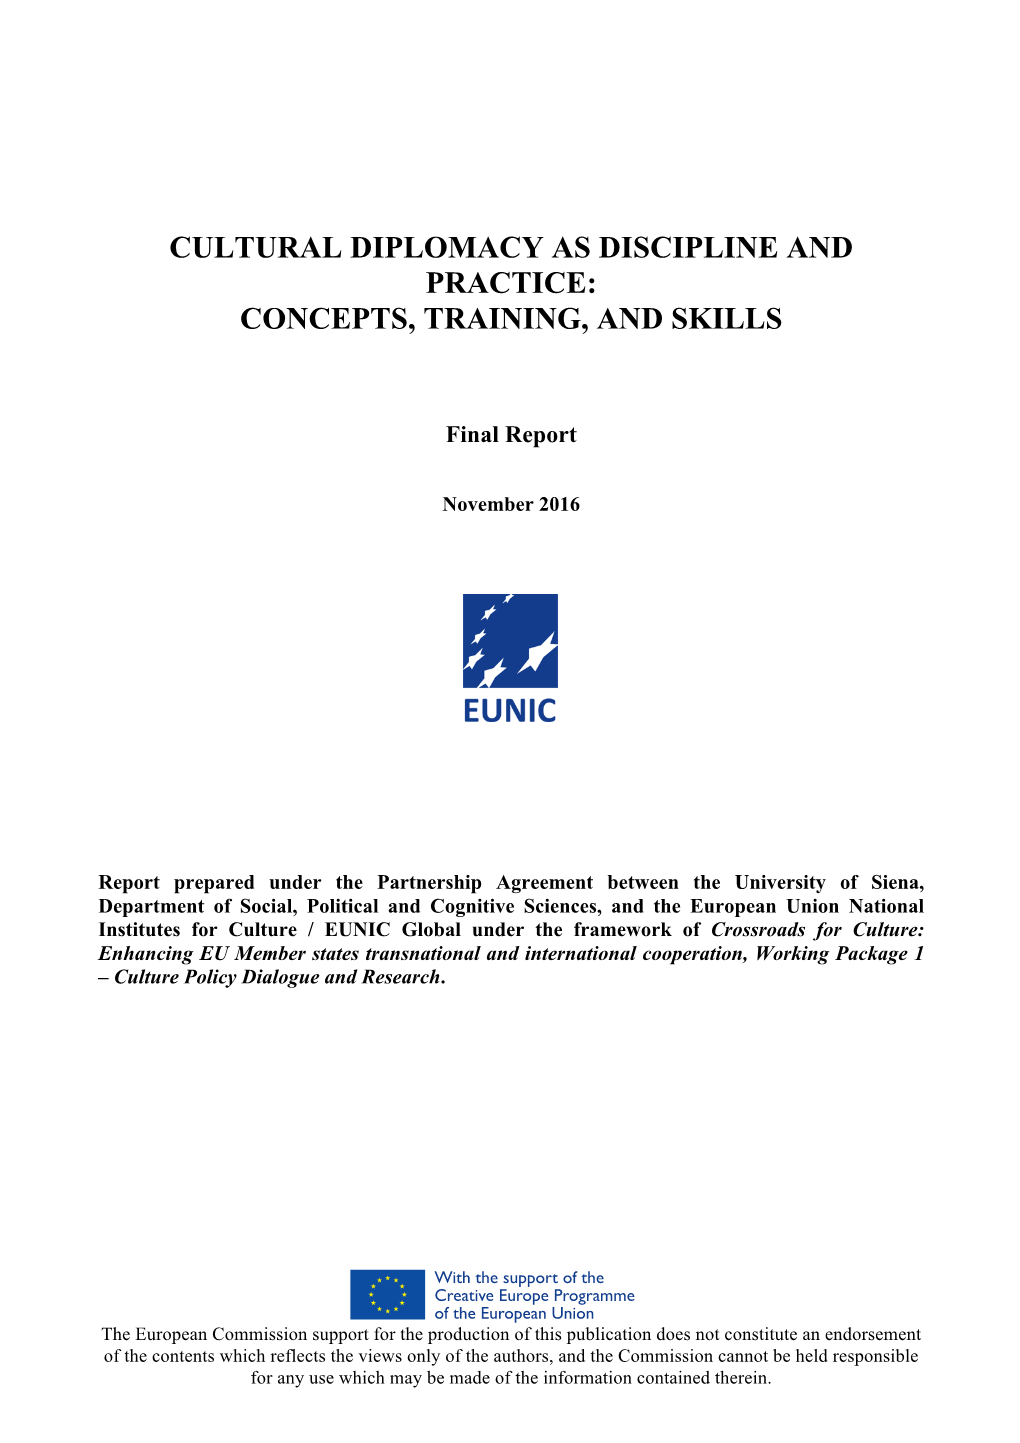 Cultural Diplomacy As Discipline and Practice: Concepts, Training, and Skills